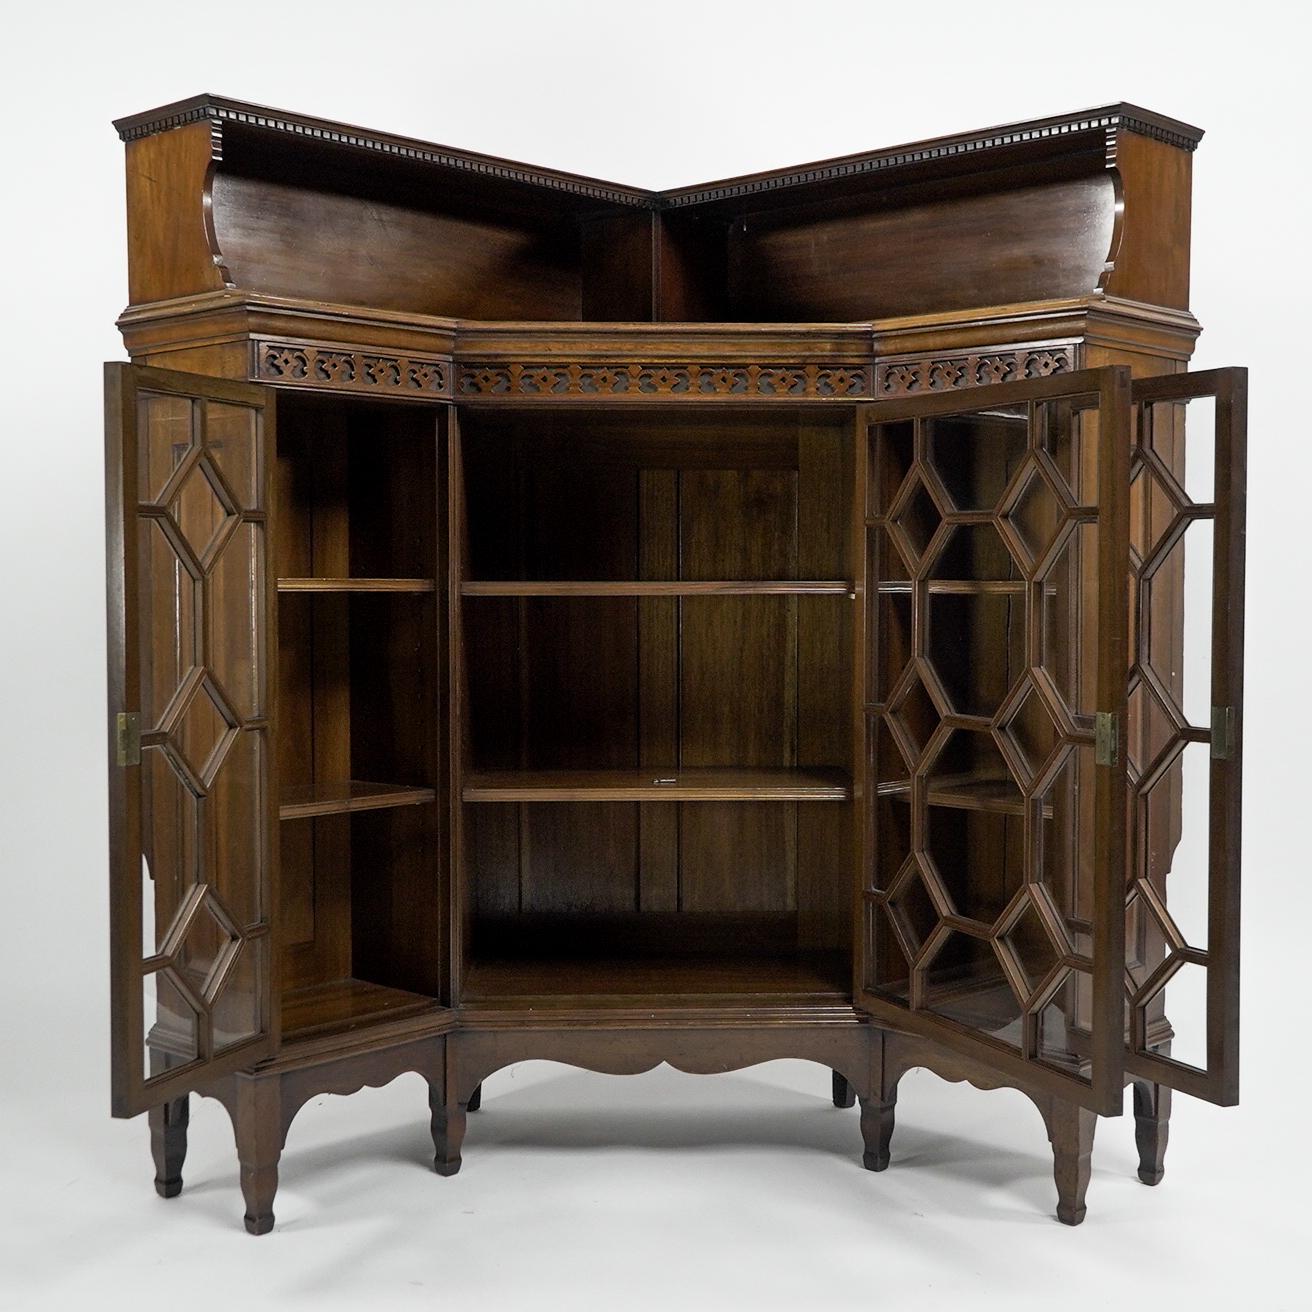 George Jack for Morris and Co. Stamped Morris and Co. 449 Oxford Street. Two matching Aesthetic Movement Walnut glazed corner cabinets, each with an open display area to the top and dentil molded decoration with blind fretwork floral decoration